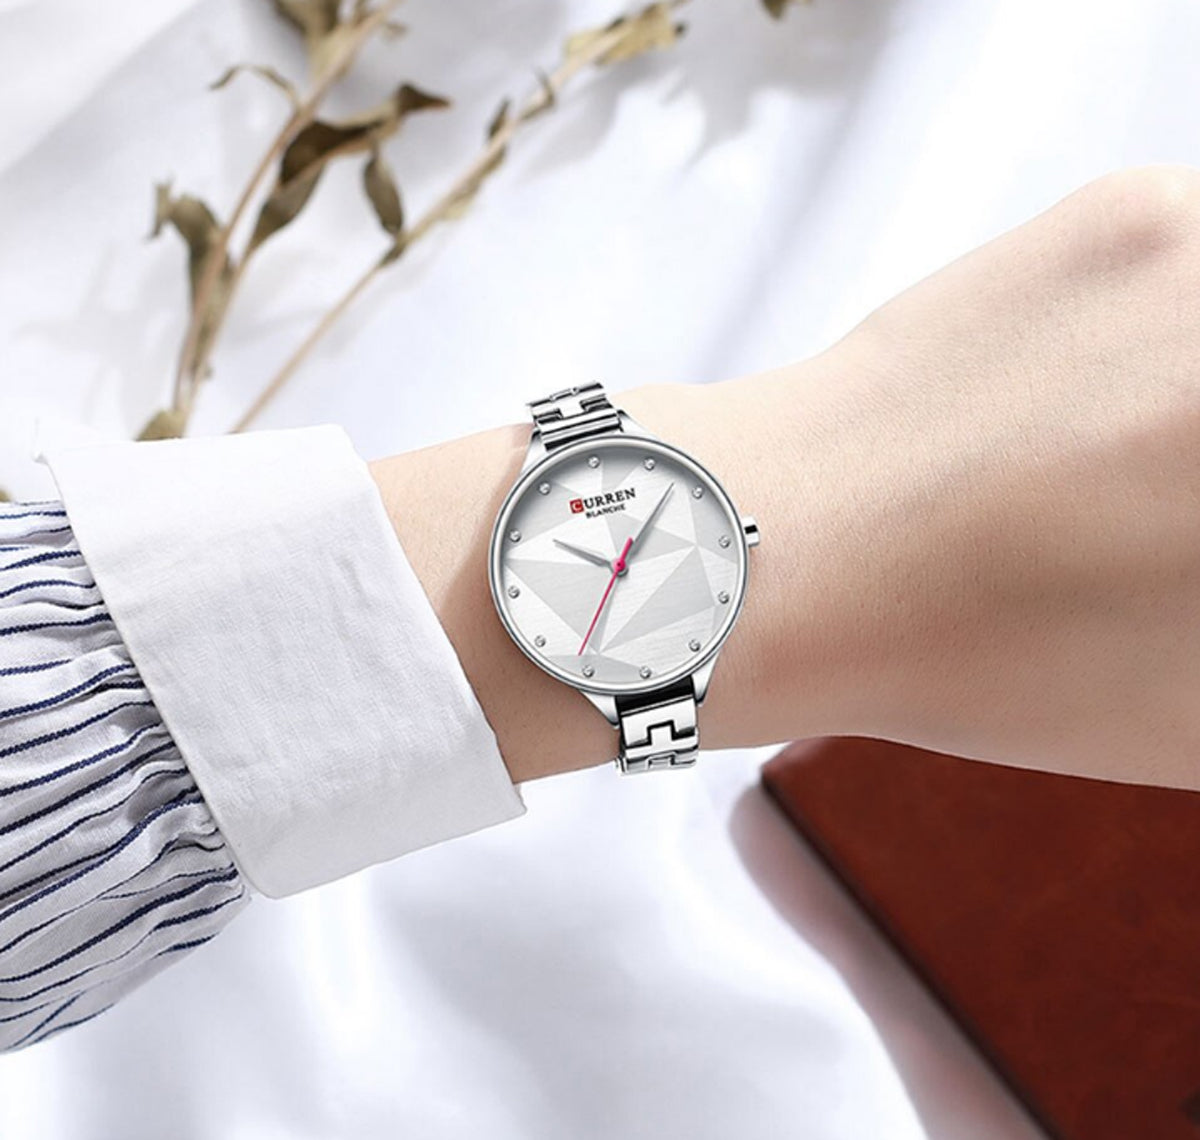 CURREN Original Brand Stainless Steel Band Wrist Watch For Women With Brand (Box & Bag)-9047